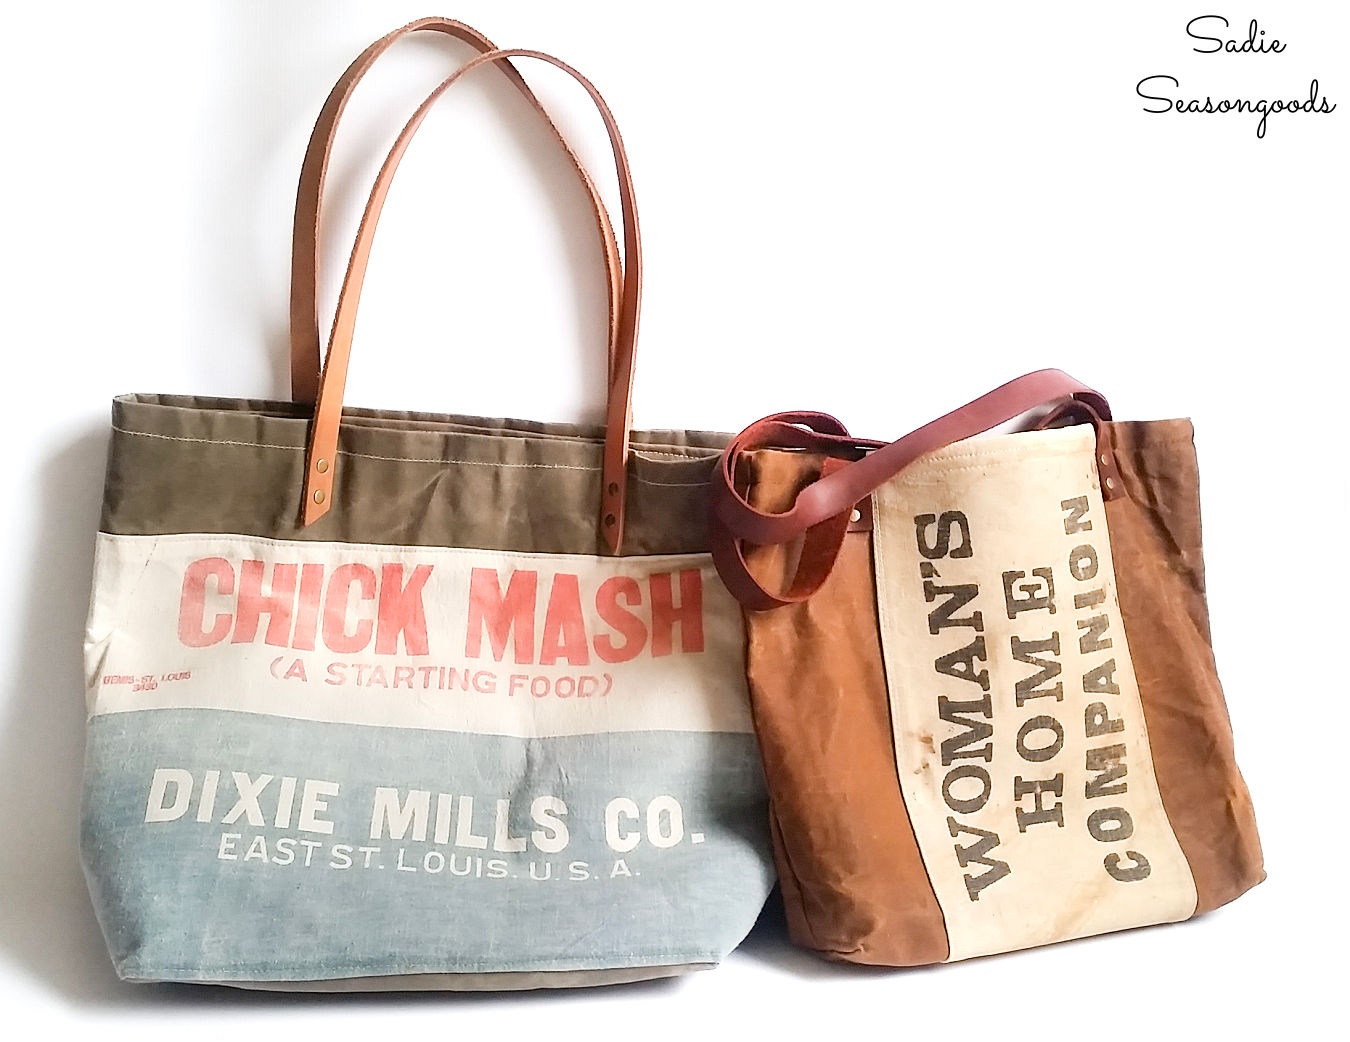 upcycled tote bags that are made from old canvas